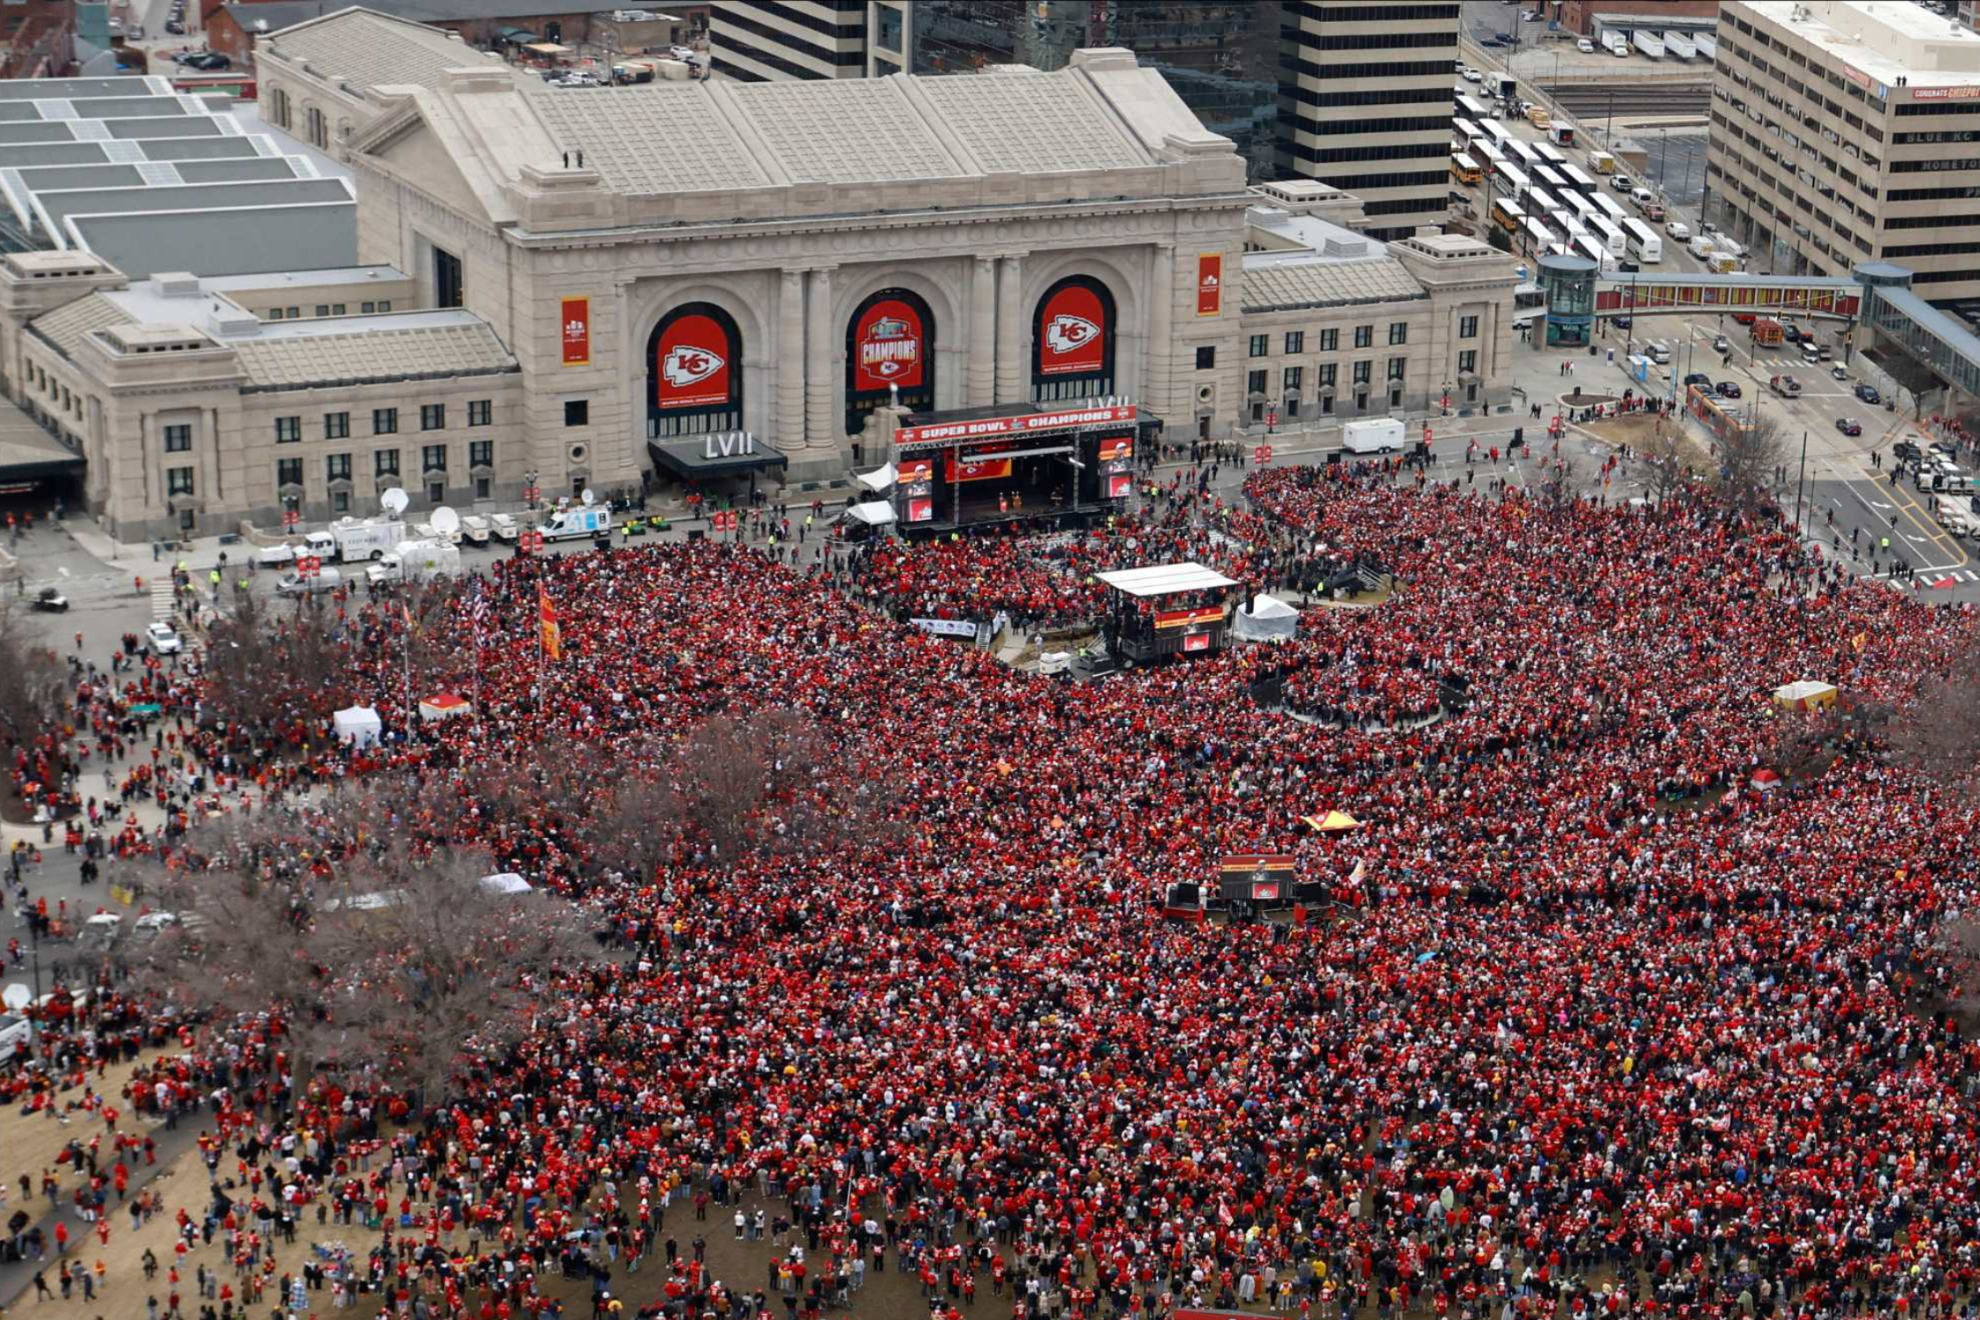 Teenager is facing felony charge in connection to Kansas City Chiefs Super Bowl celebration mass shooting